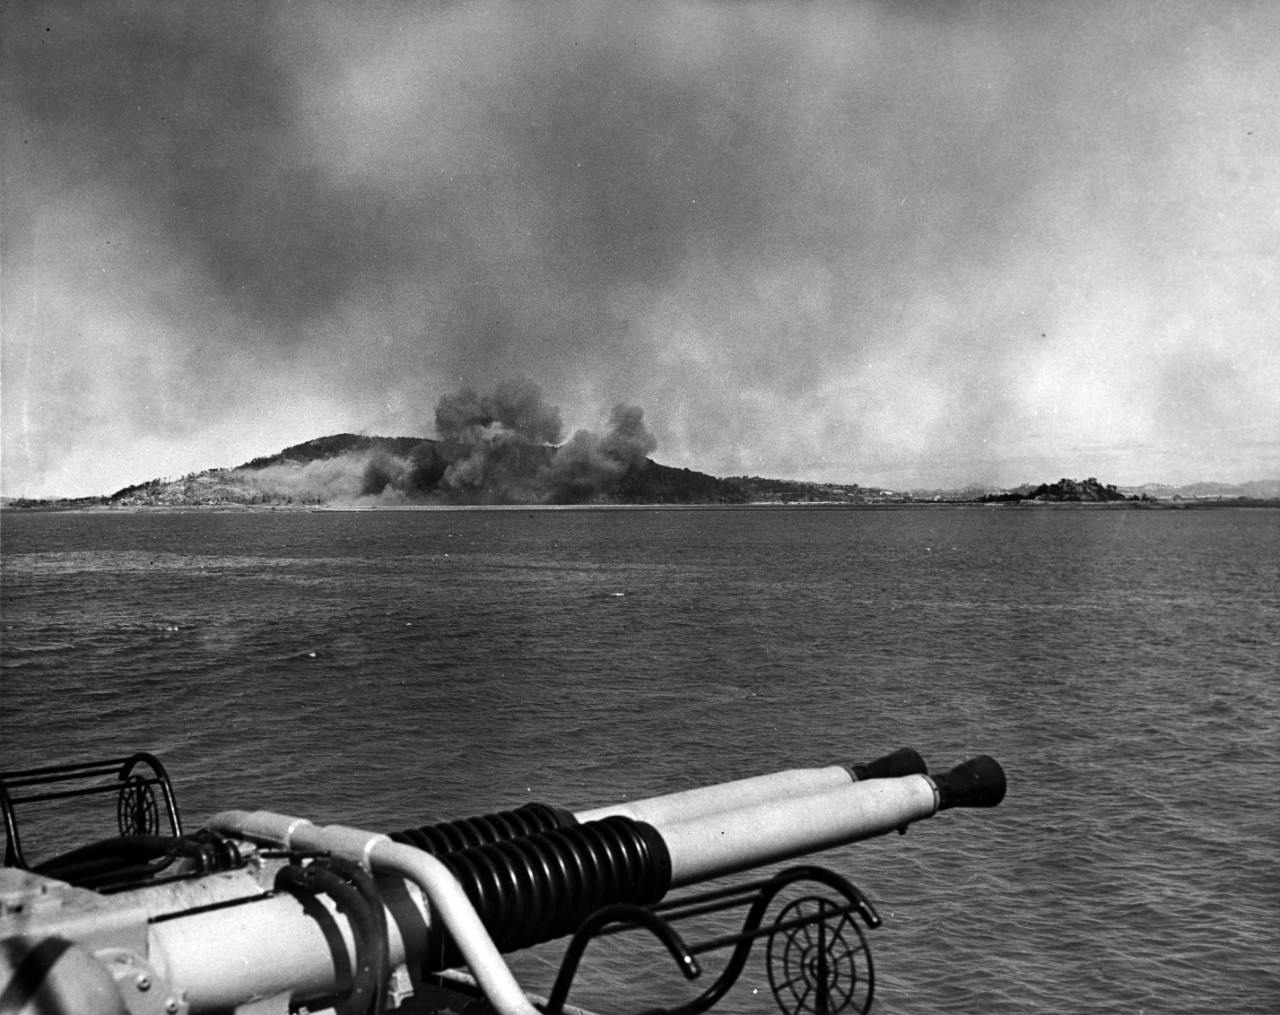 Wolmi-Do island under bombardment on 13 September 1950, two days before the landings at Inchon.